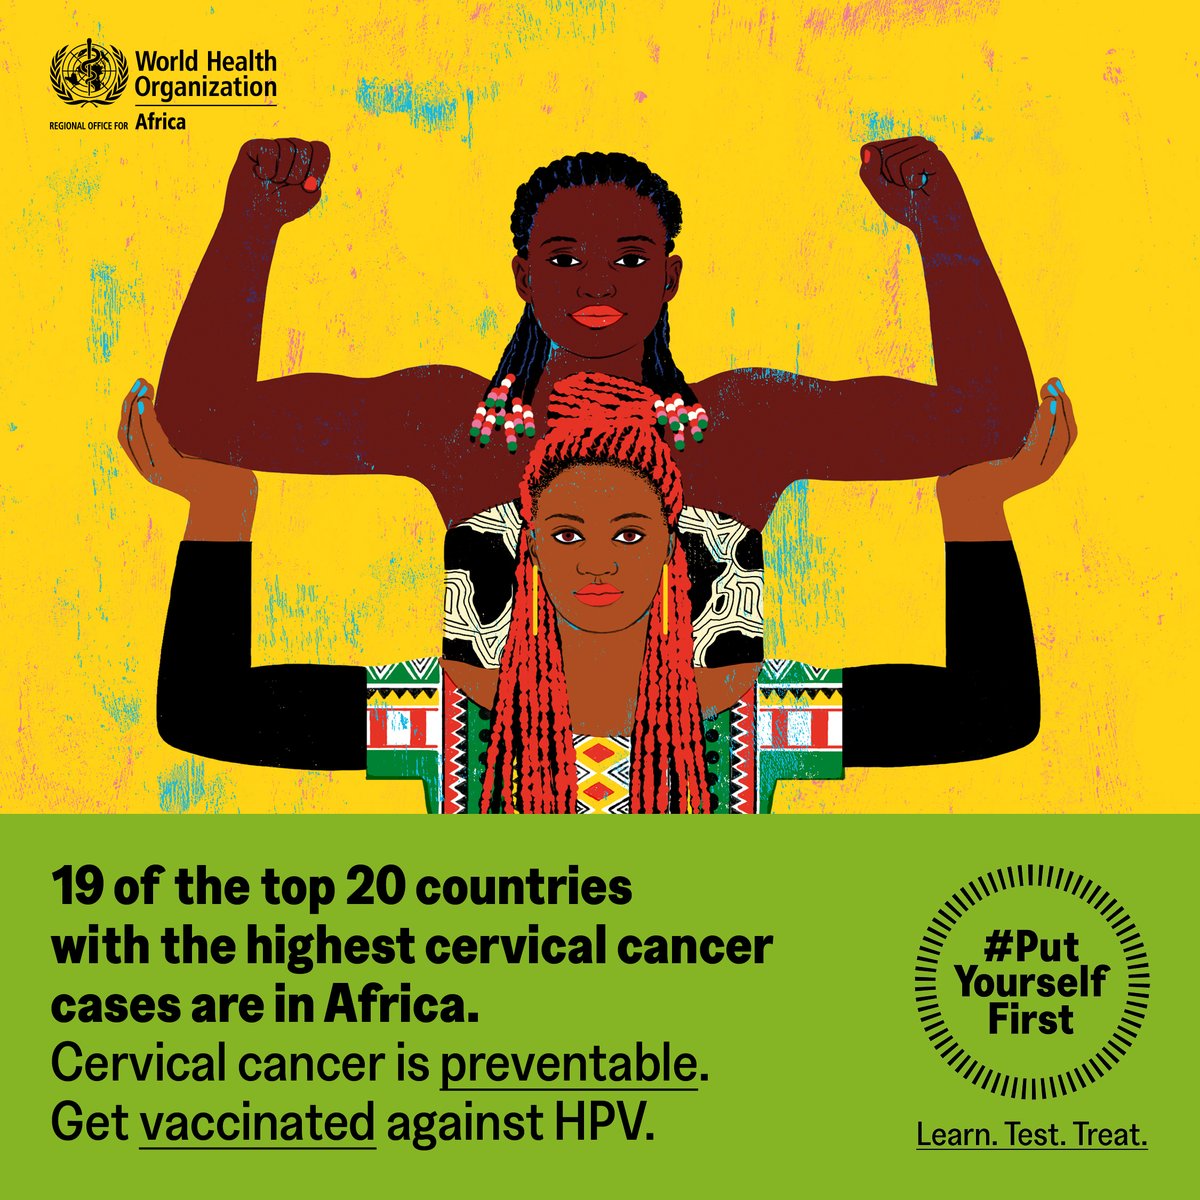 Cervical cancer is preventable: 

👧🏿 Girls age 9-13 can be protected by getting the #HPV vaccine. 

👩🏾 For women, #HPV screening can be used for early detection

#HPVAwarenessDay